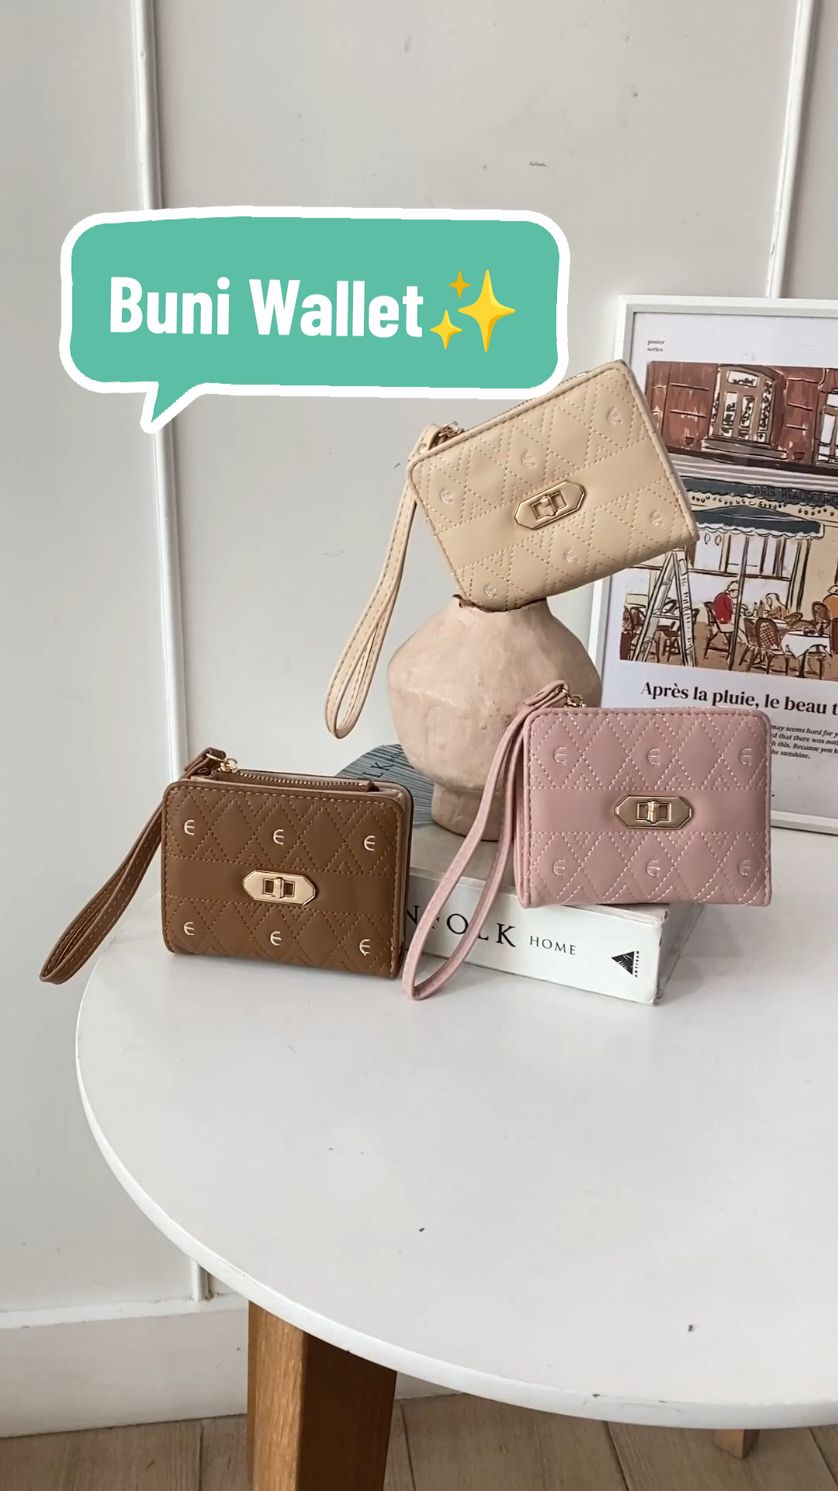 Mini chic Buni Wallet, looks so sweet and adorable in every stitches! ✨️ #enjiid #banggapakeenji #aestheticwallet #aestheticbags #elegantbags #ootdfashion #outfitideas #OOTD #fyp #fypシ #fypage #fypシ゚viral 